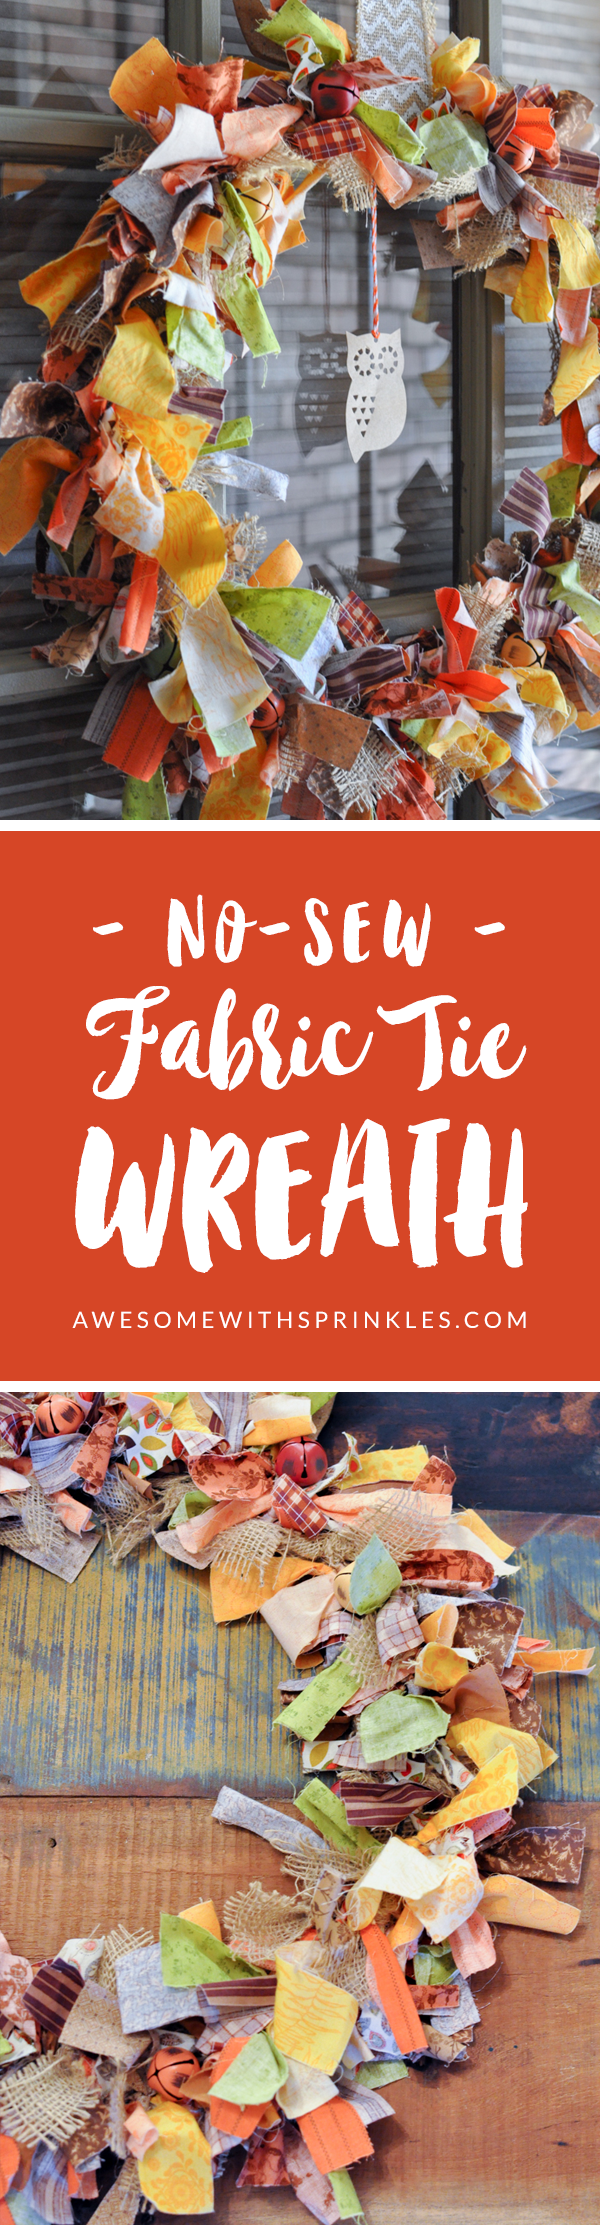 Easy No-Sew Fabric Tie Wreath | Awesome with Sprinkles